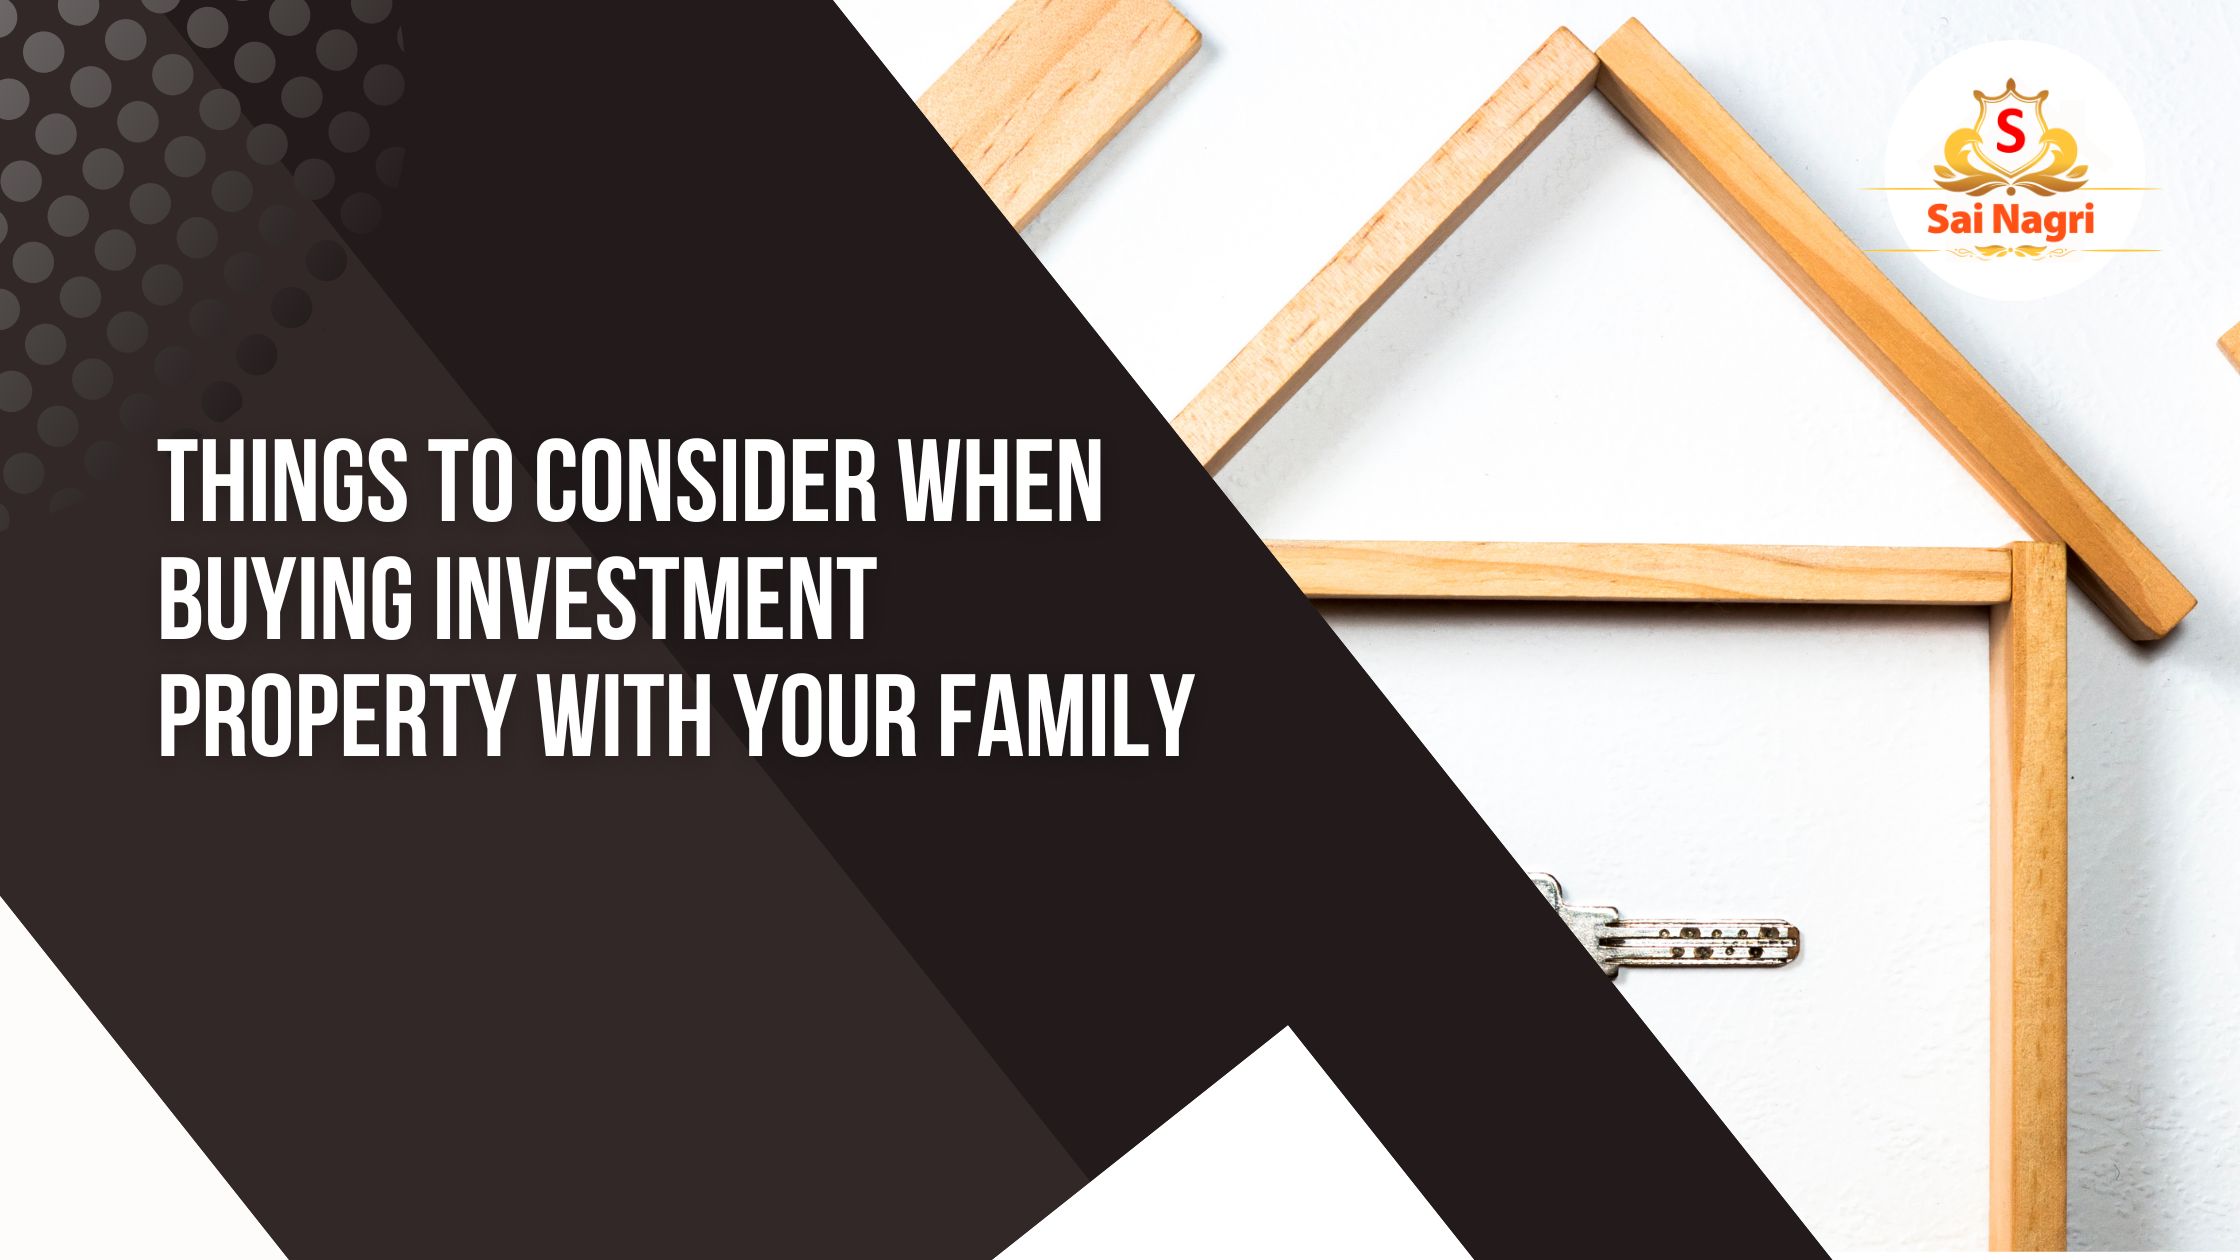  Things To Consider When Buying Investment Property With Your Family